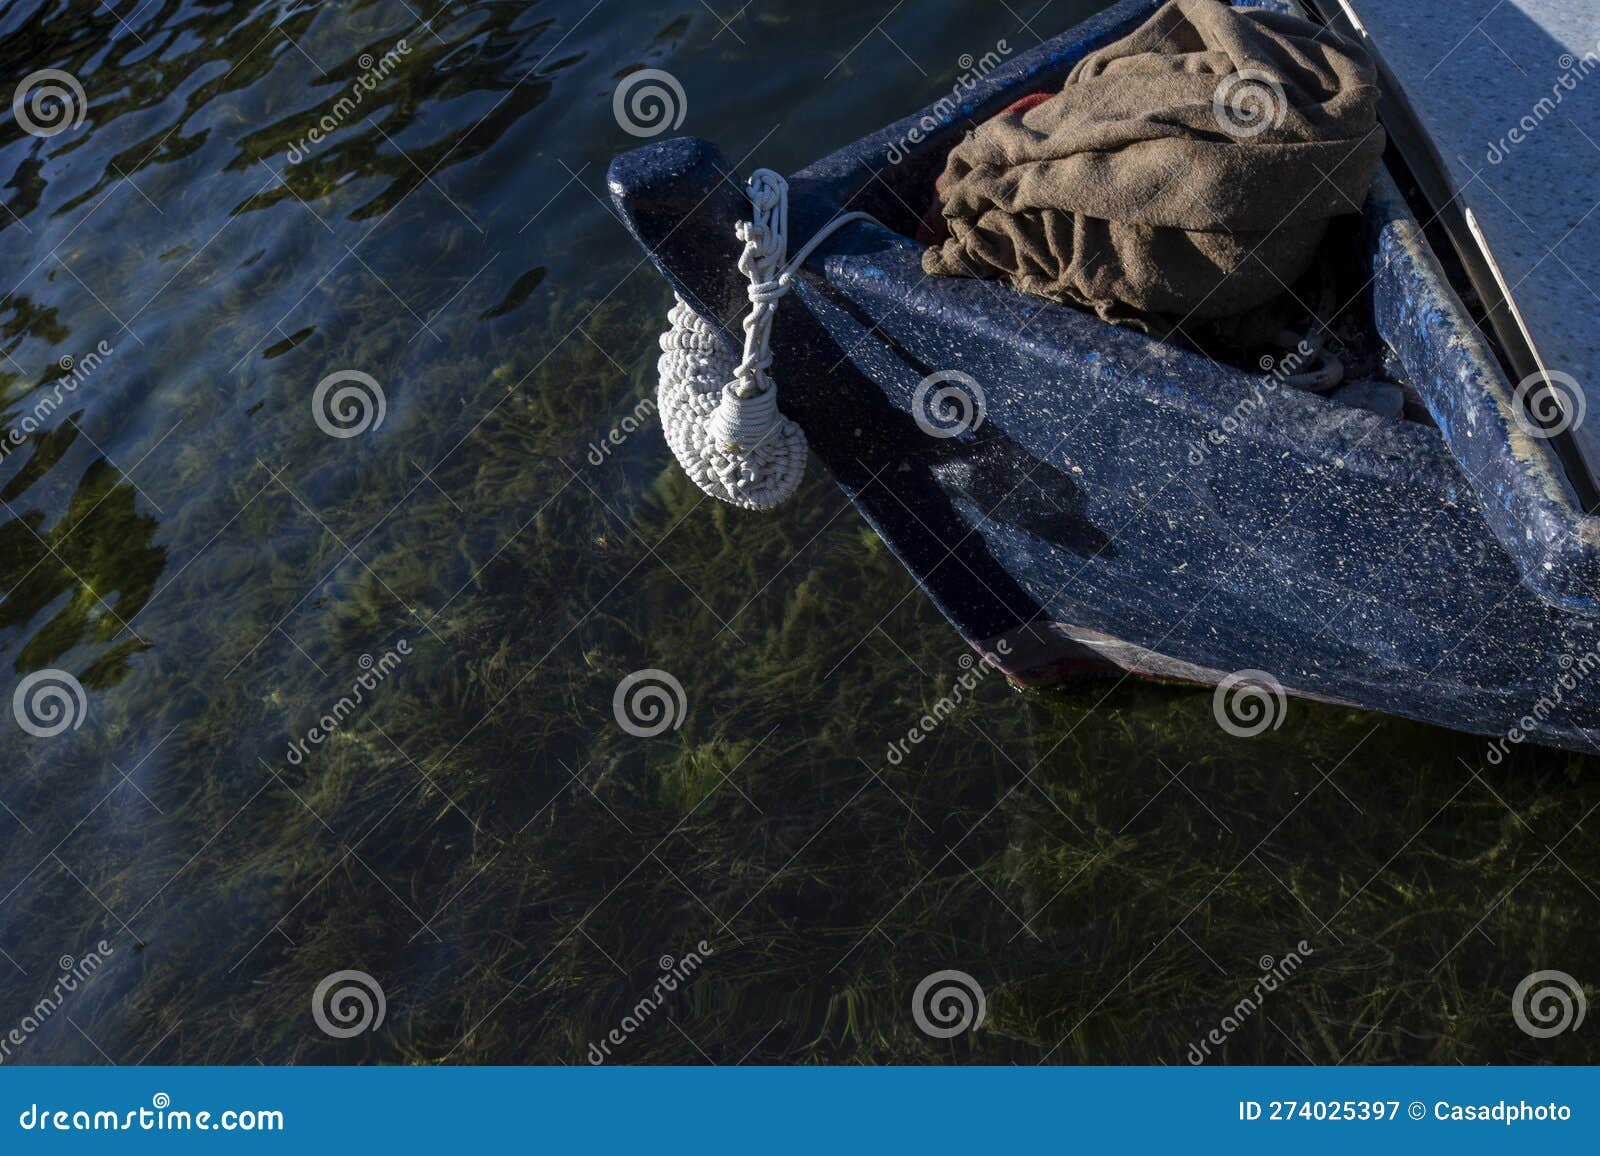 Blue Fishing Boat Over Dark Water and Aquatic Plants. Ston